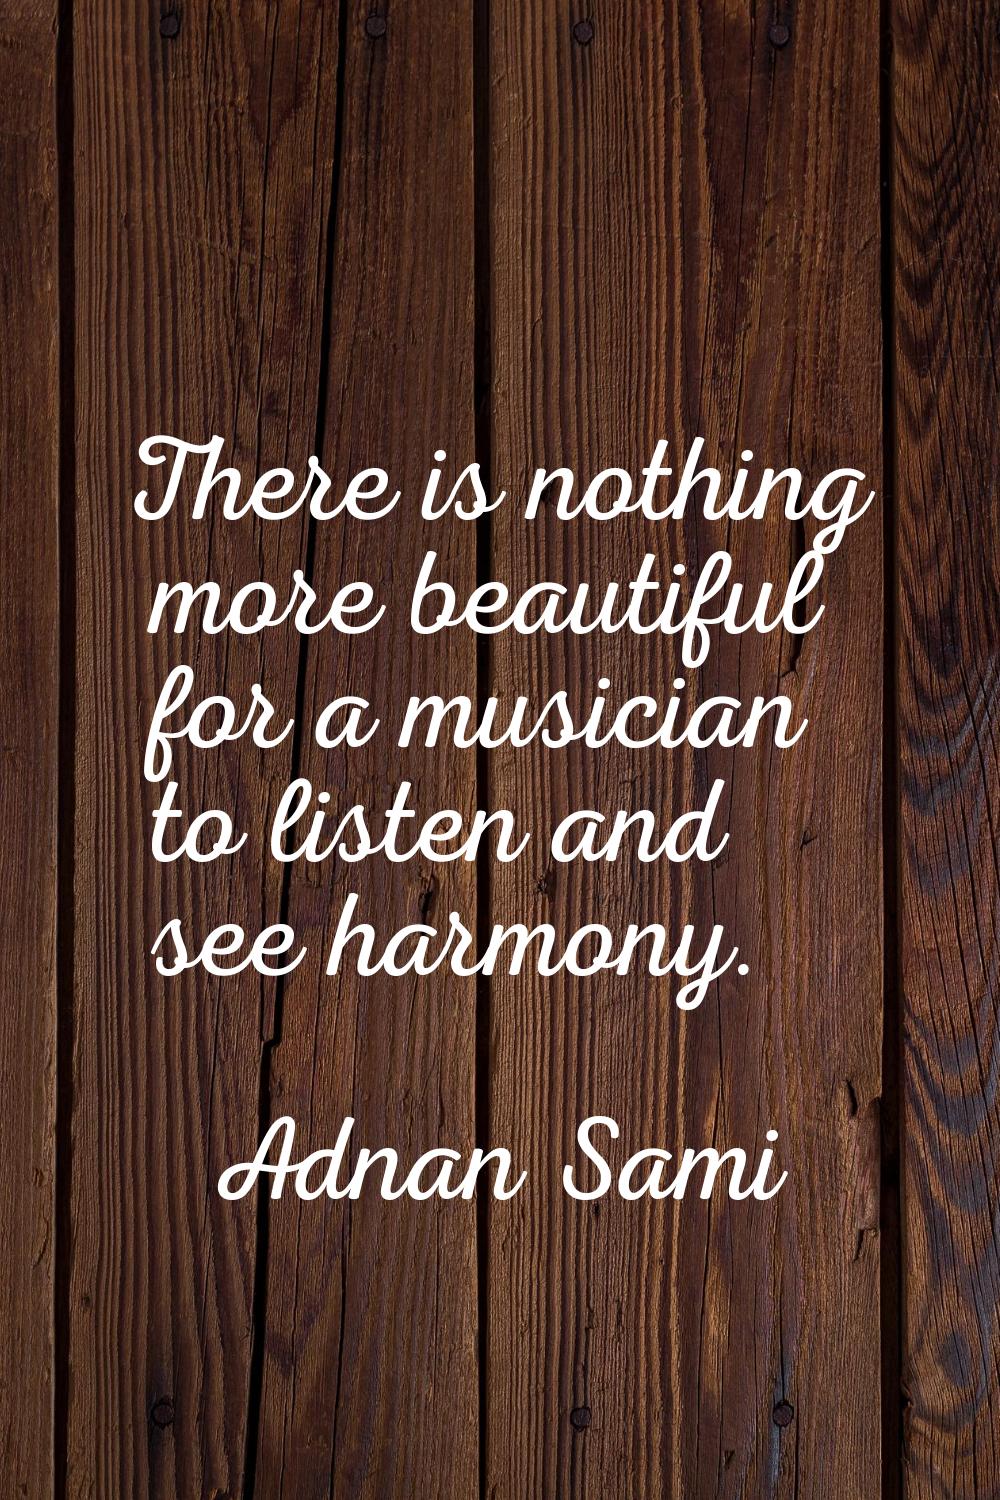 There is nothing more beautiful for a musician to listen and see harmony.